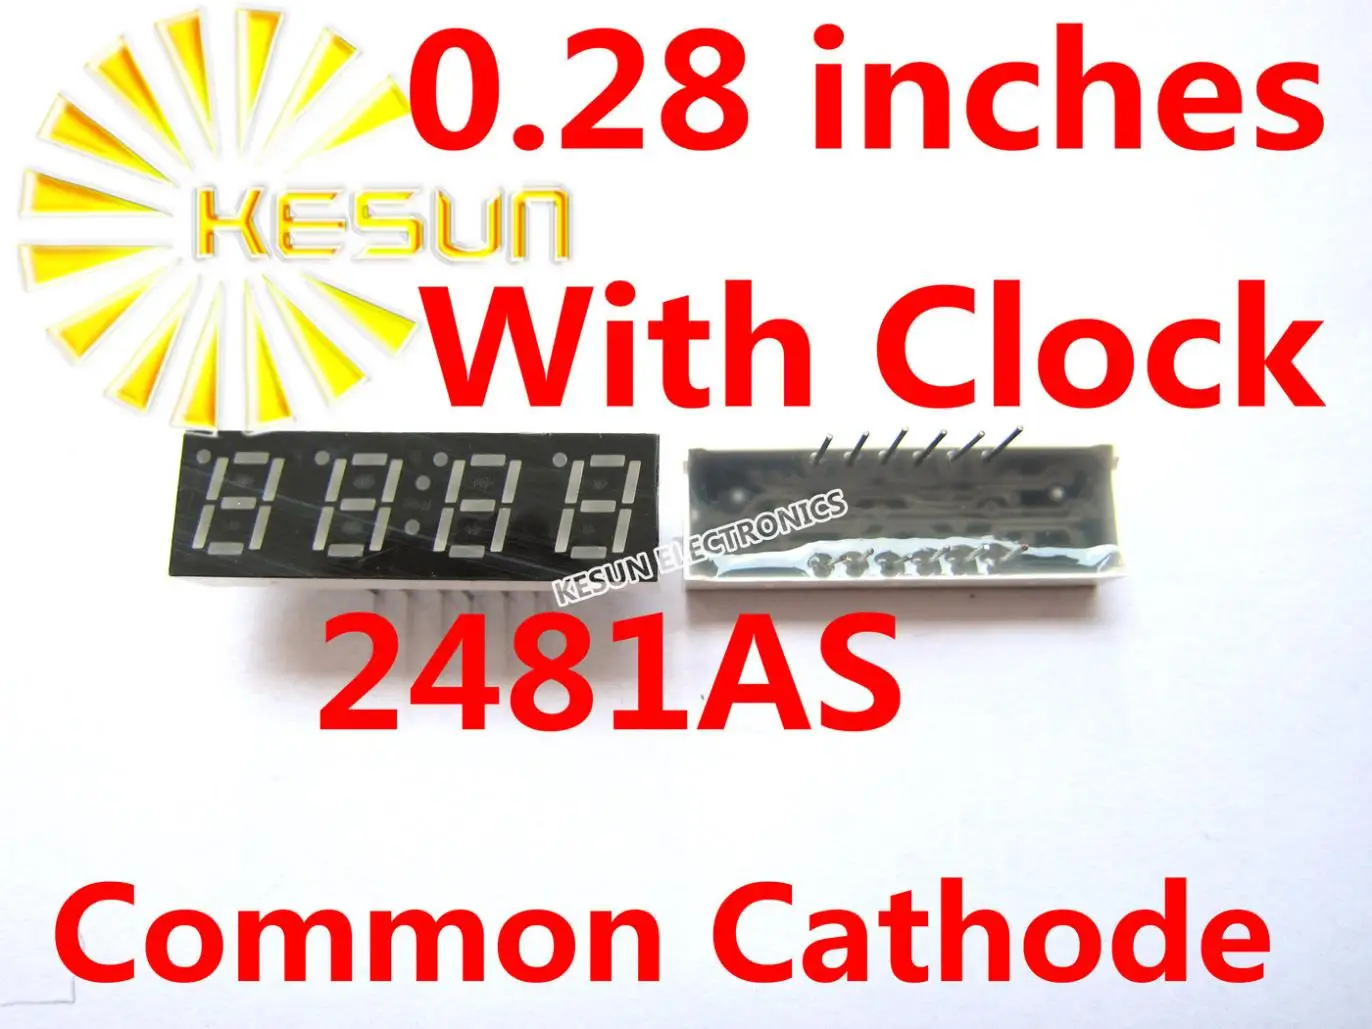 100pcs-x-028-inches-red-common-cathode-anode-4-digital-tube-with-clock-2481as-2481bs-12pin-led-display-module